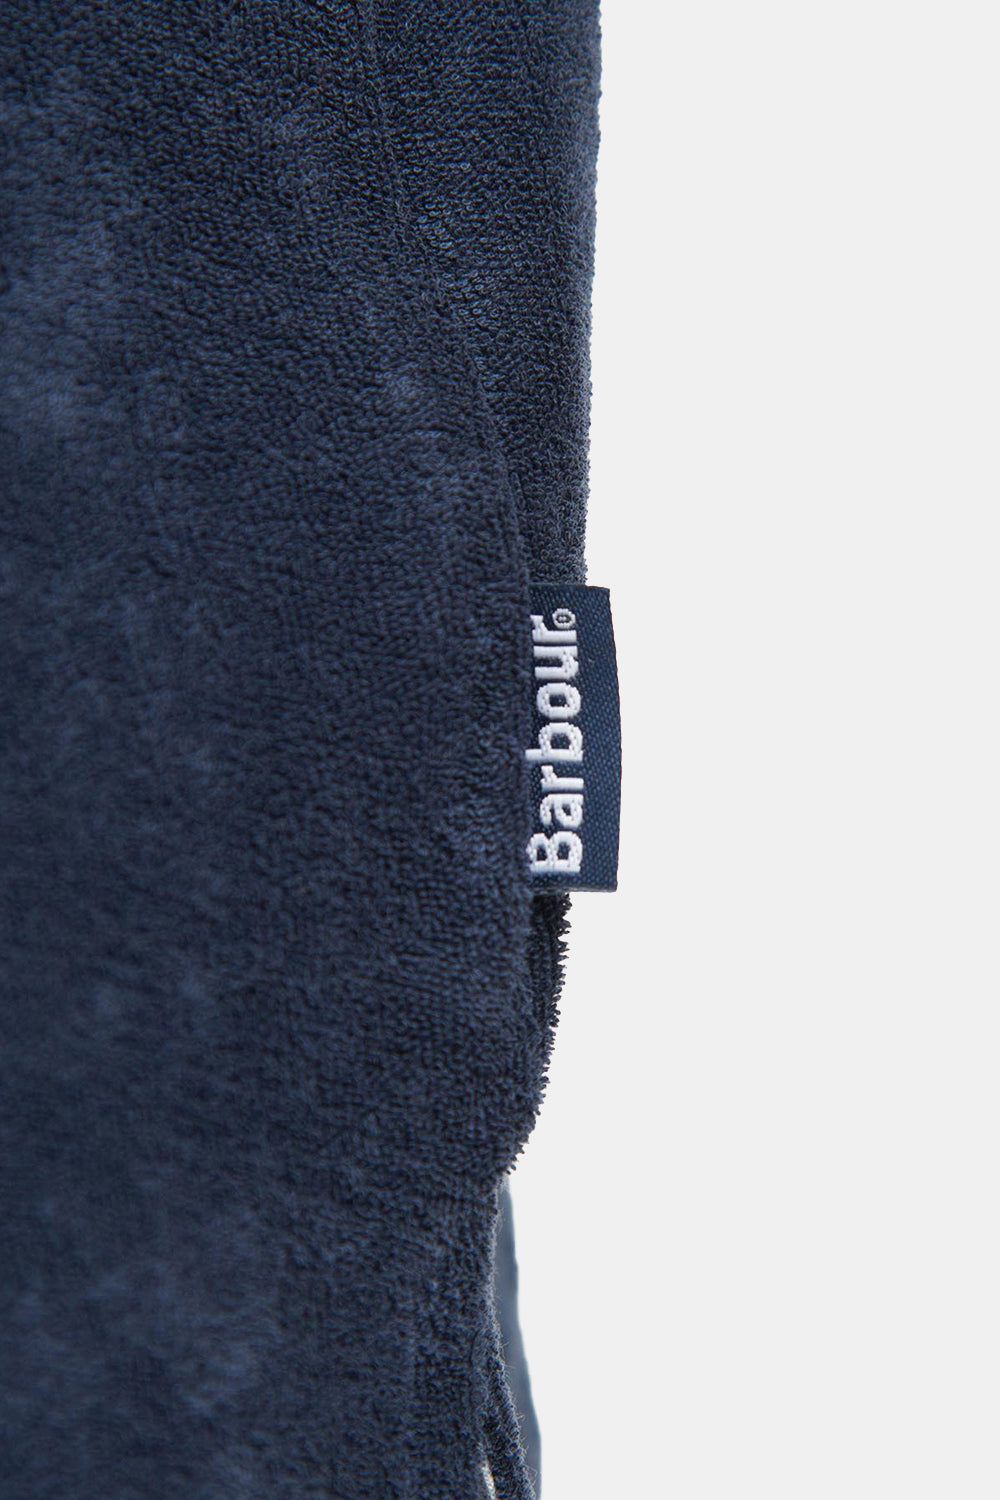 Barbour Cowes Polo (Navy) | Number Six